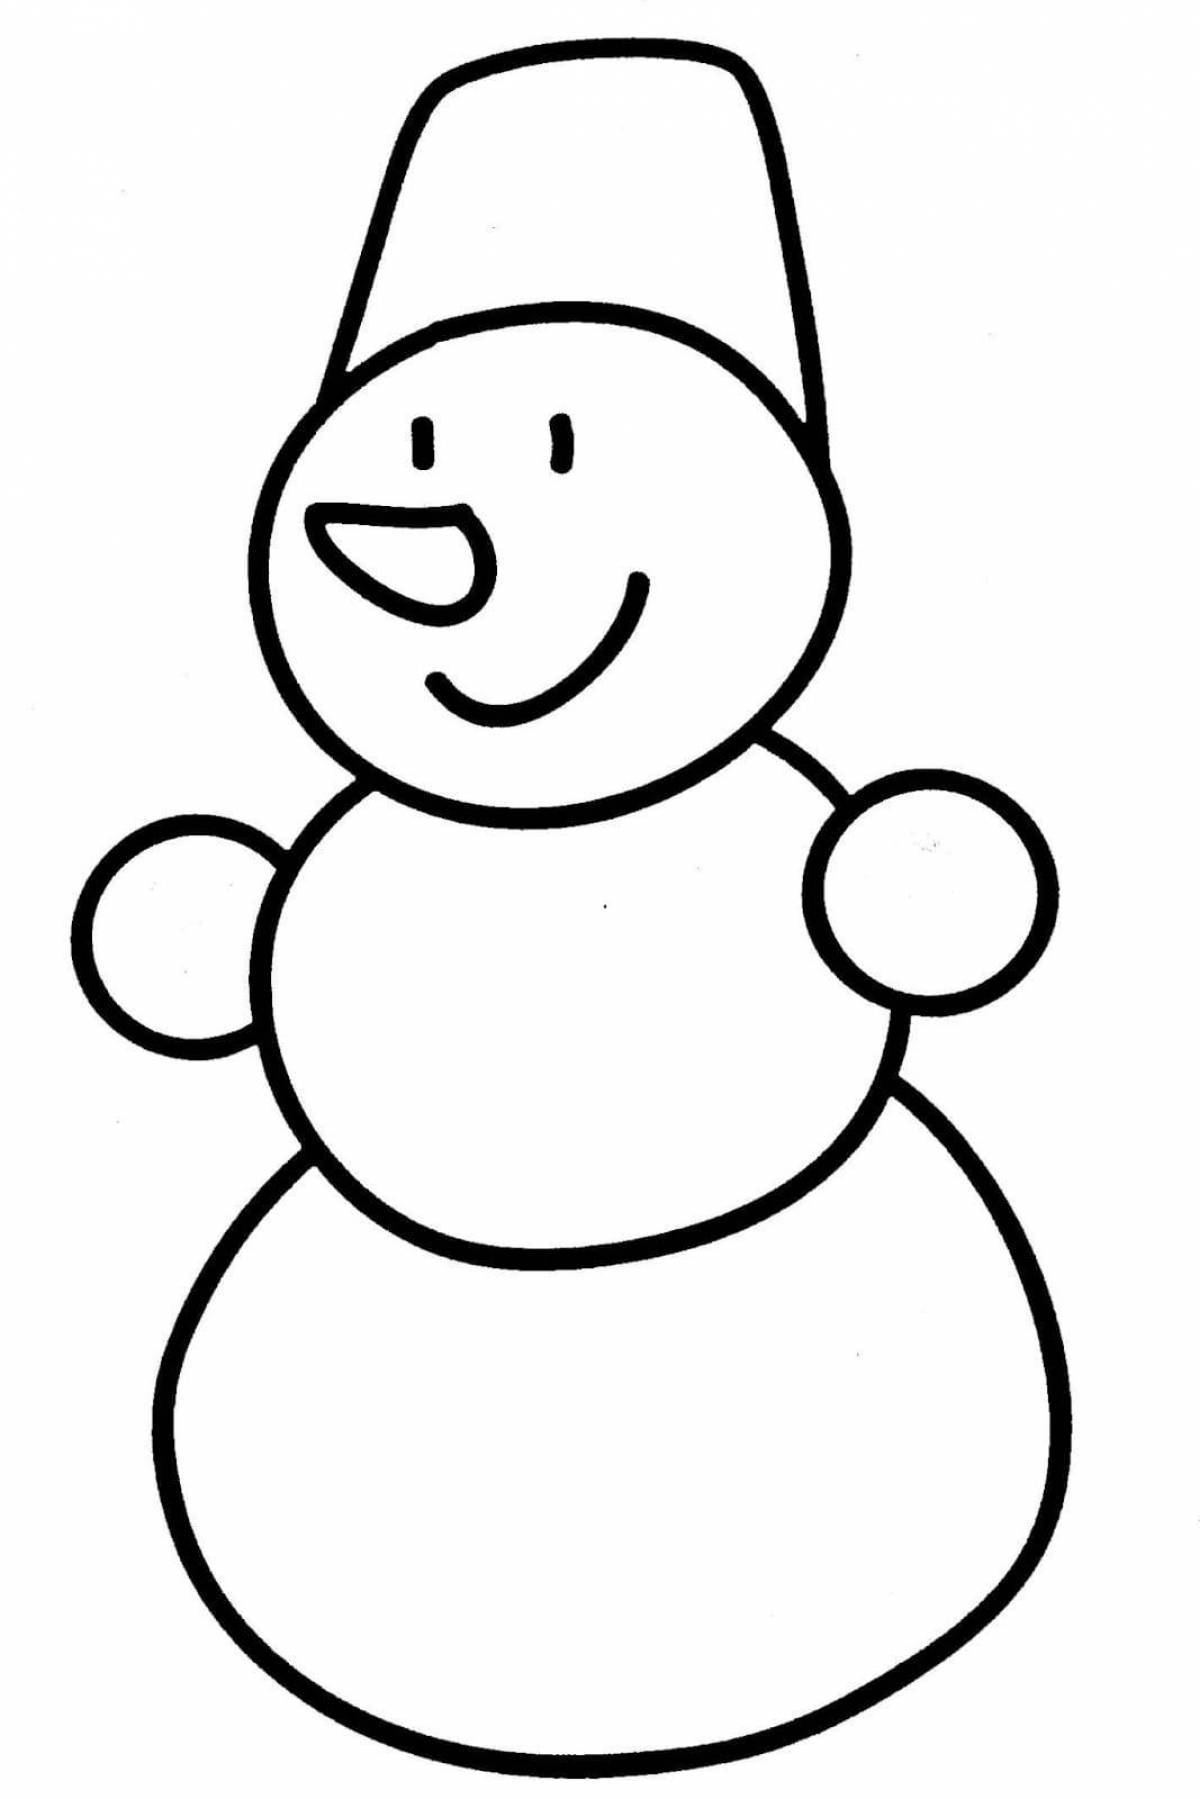 Snowman for children 3 4 years old #8